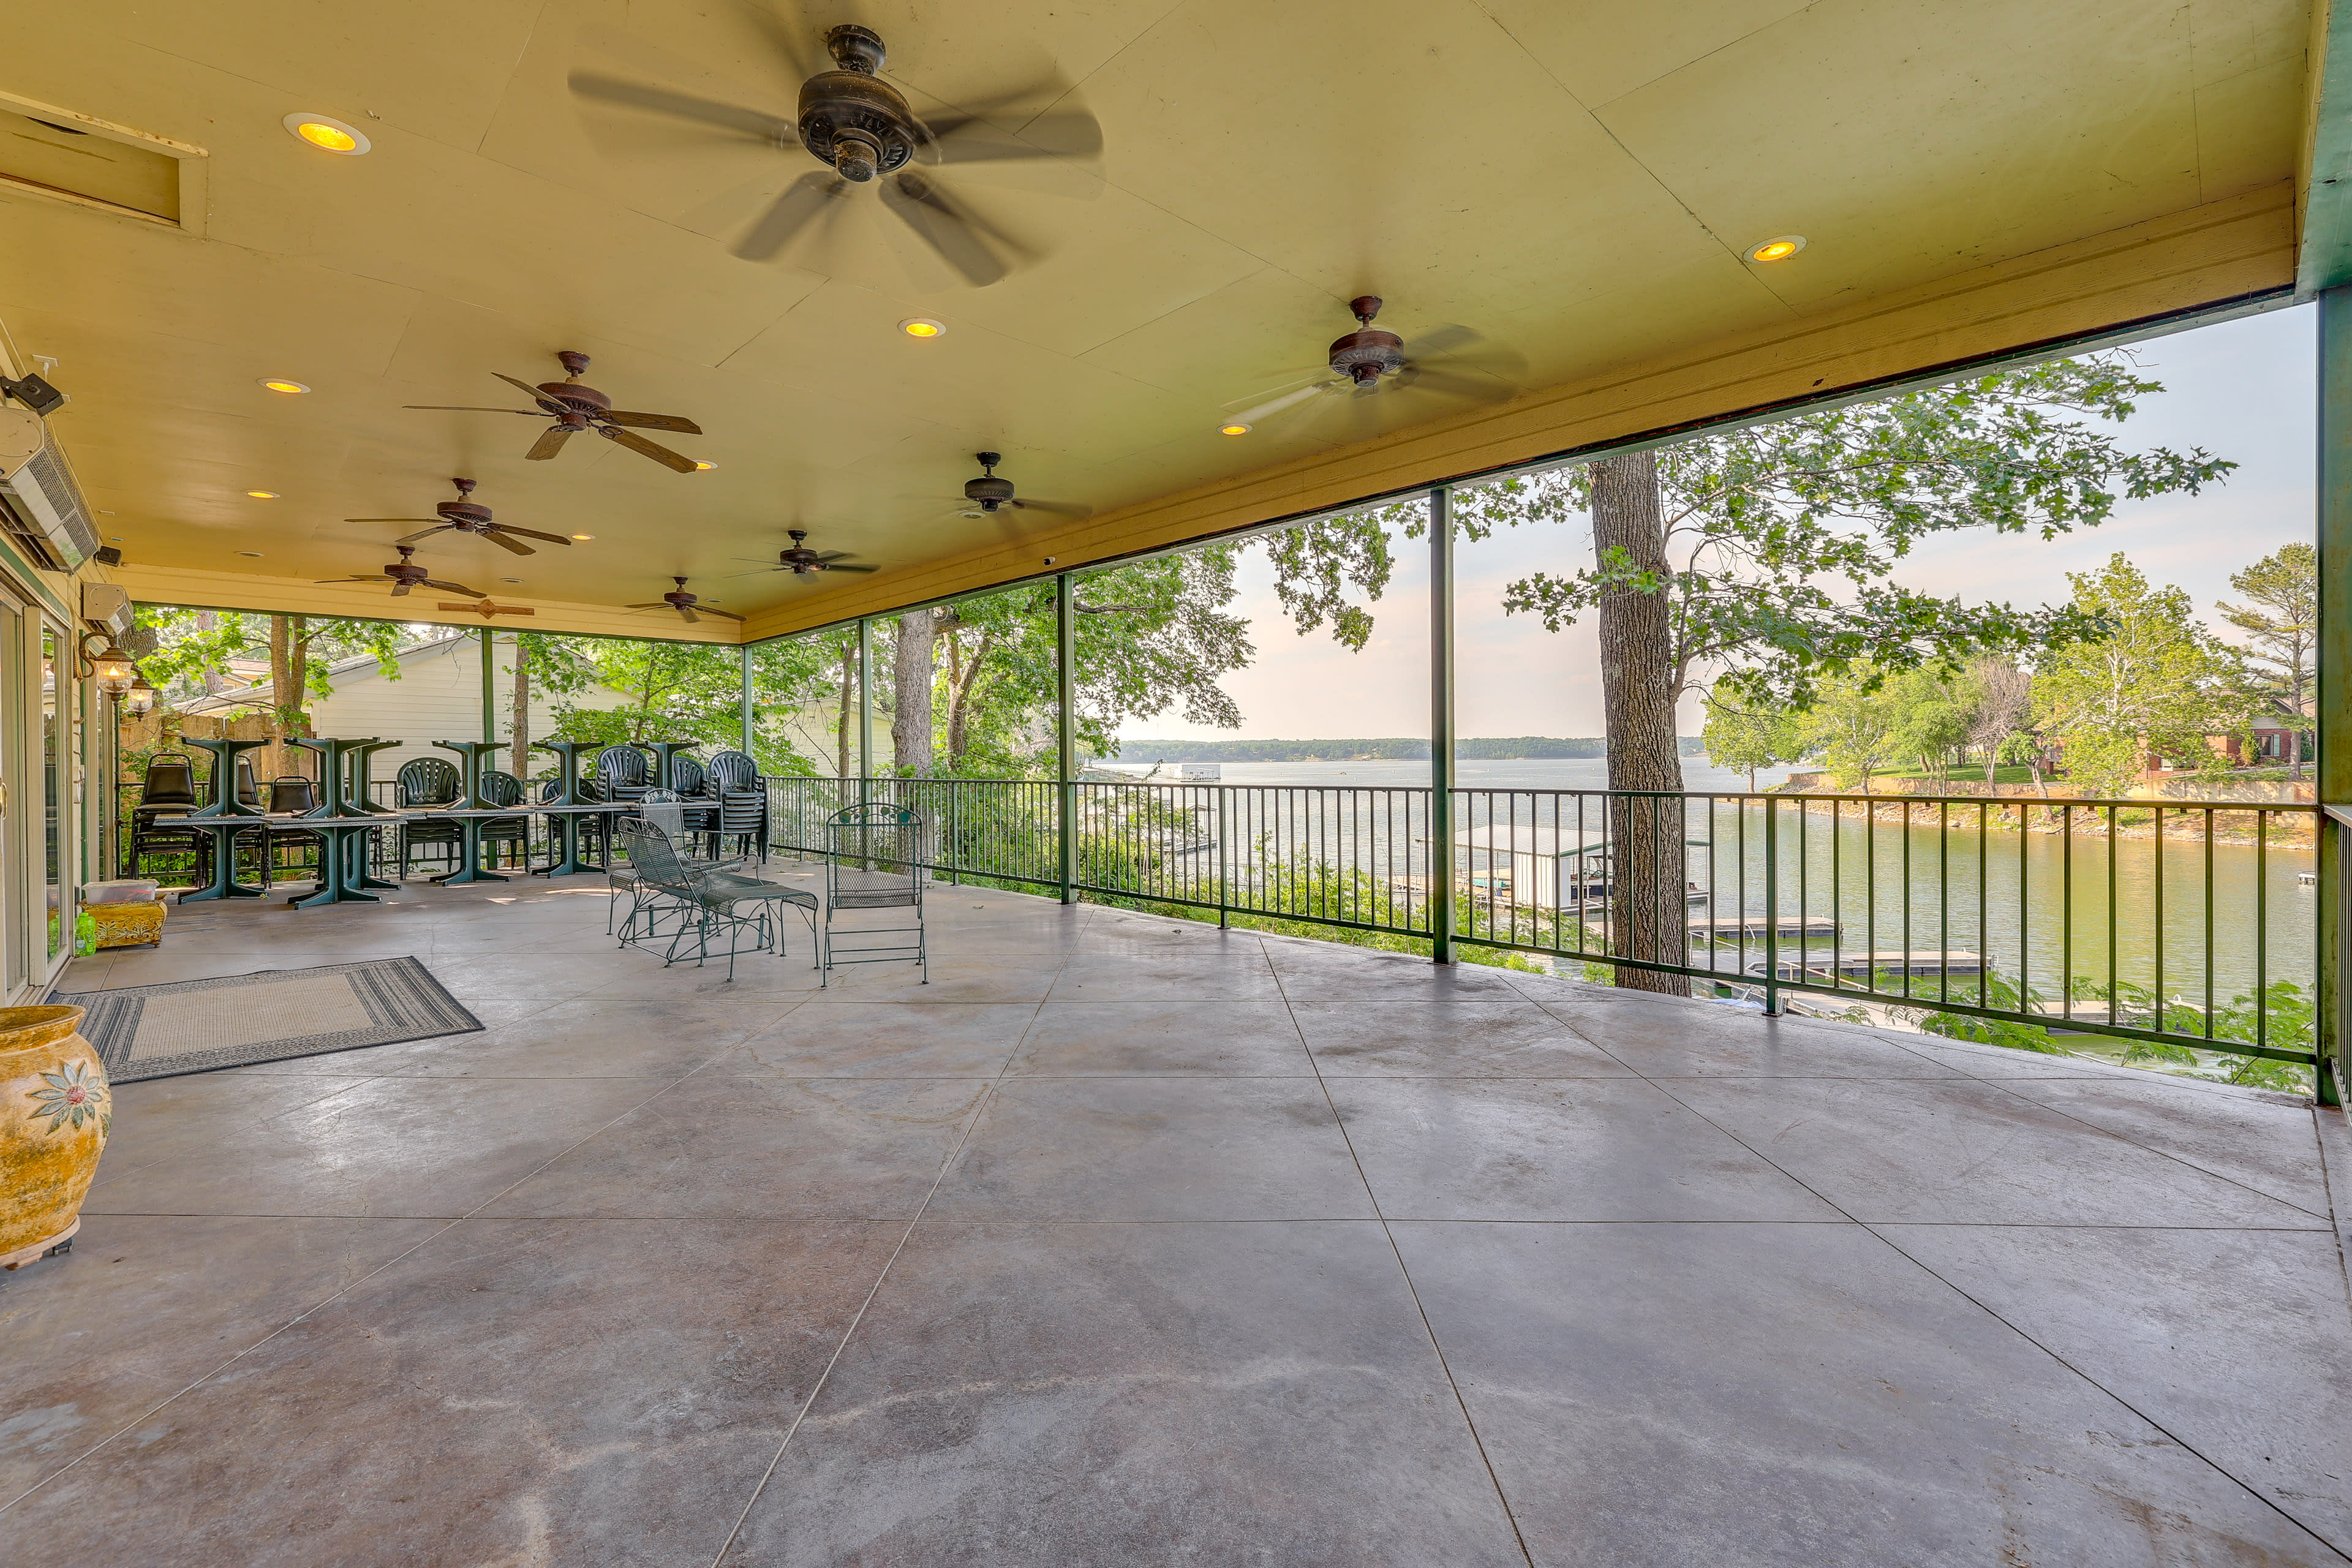 Covered Patio | Outdoor Seating | Gas Grill